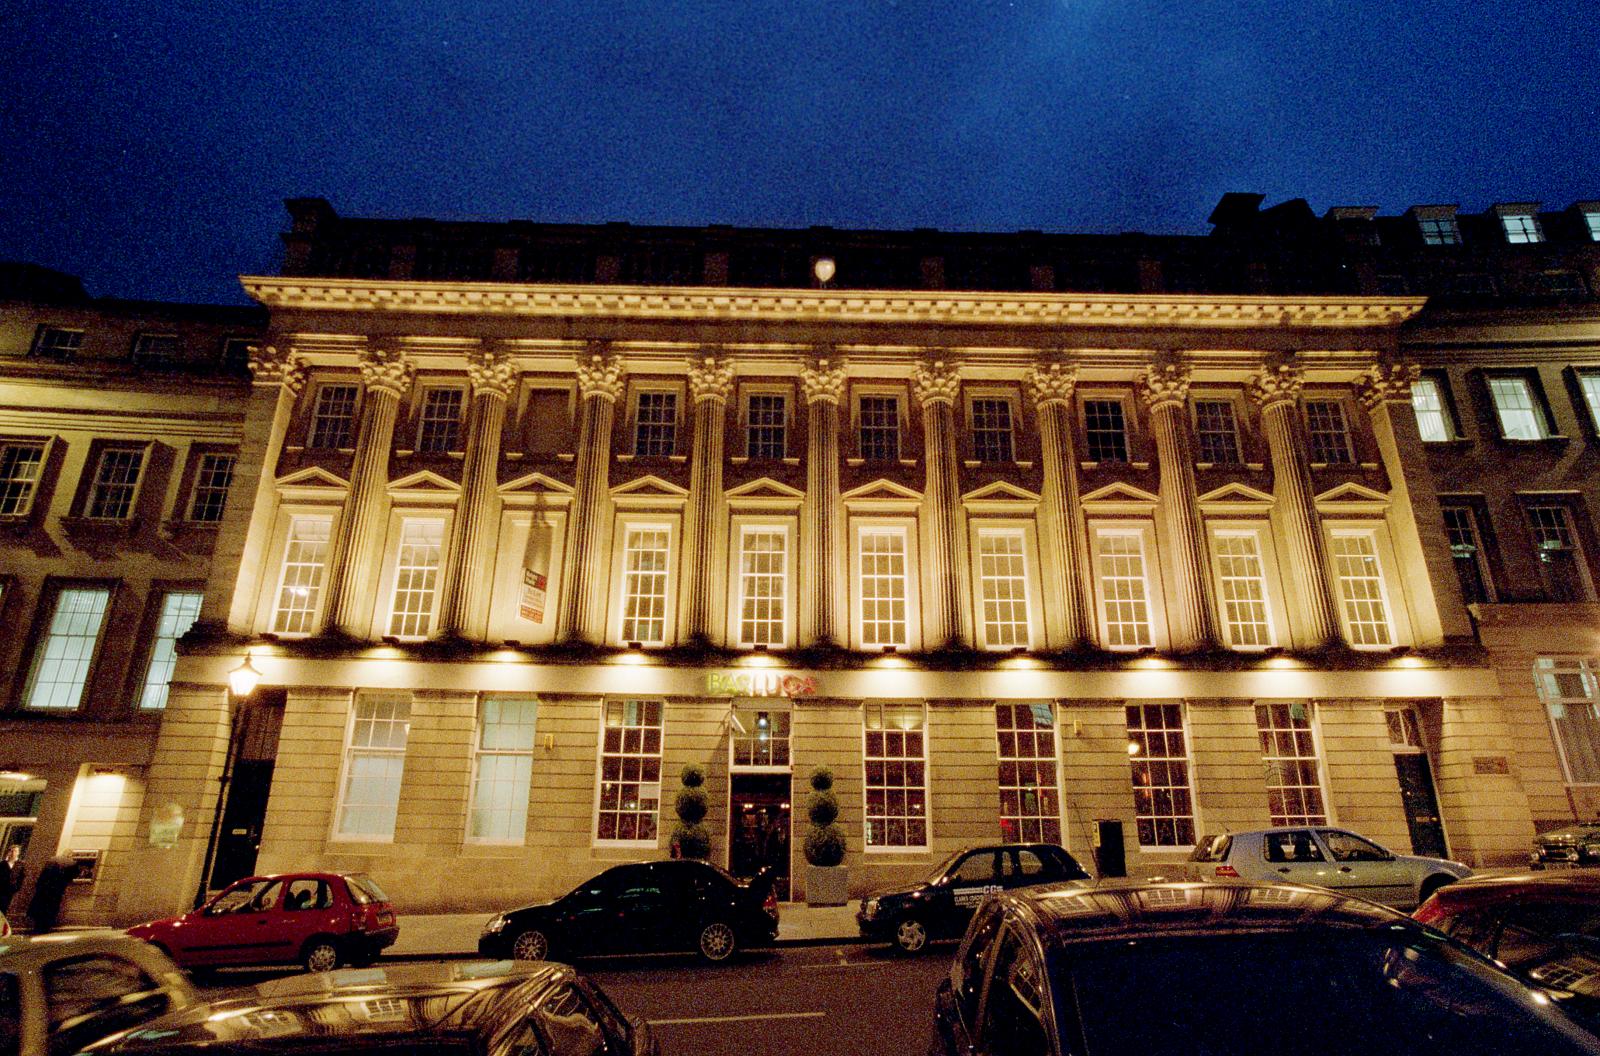 Night time view of Georgian building featuring Giant Corinthian Order which contains sash windows in architraves